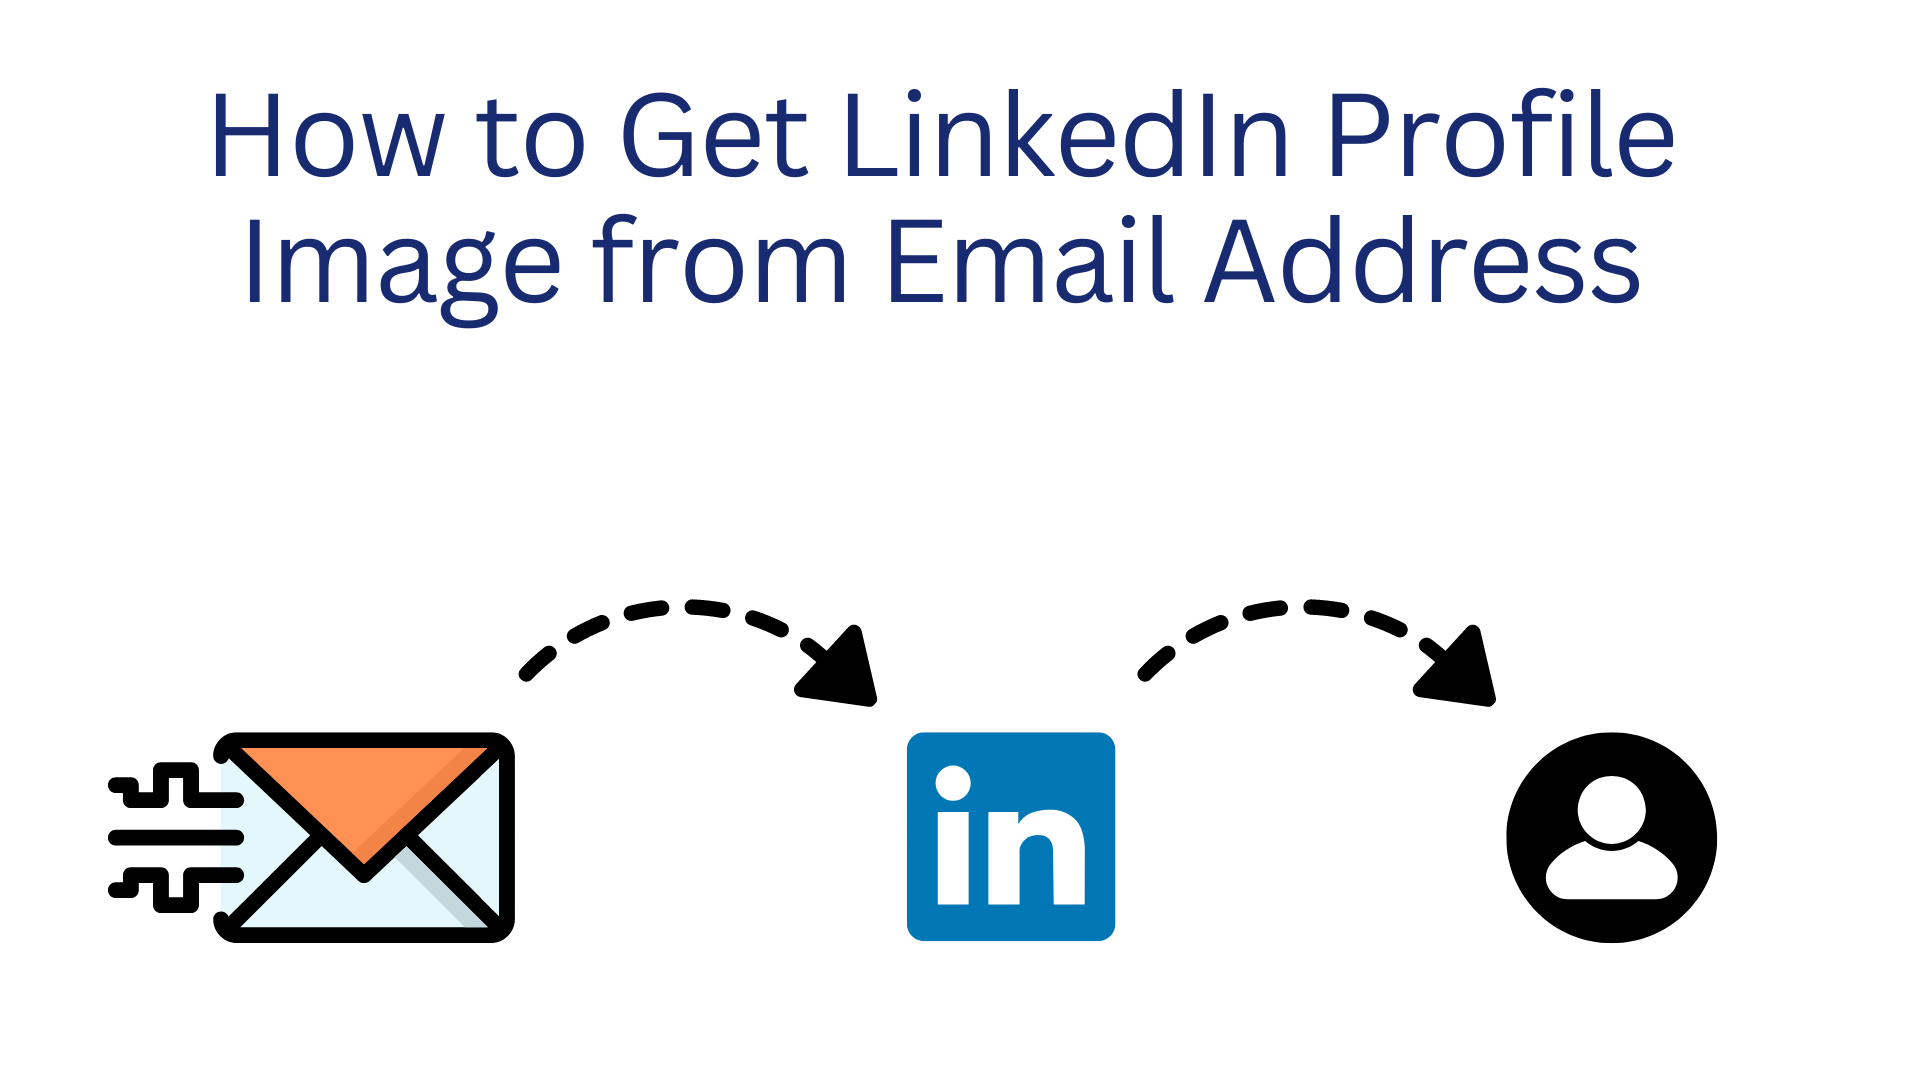 How To Find LinkedIn Profile Images from Email in Bulk